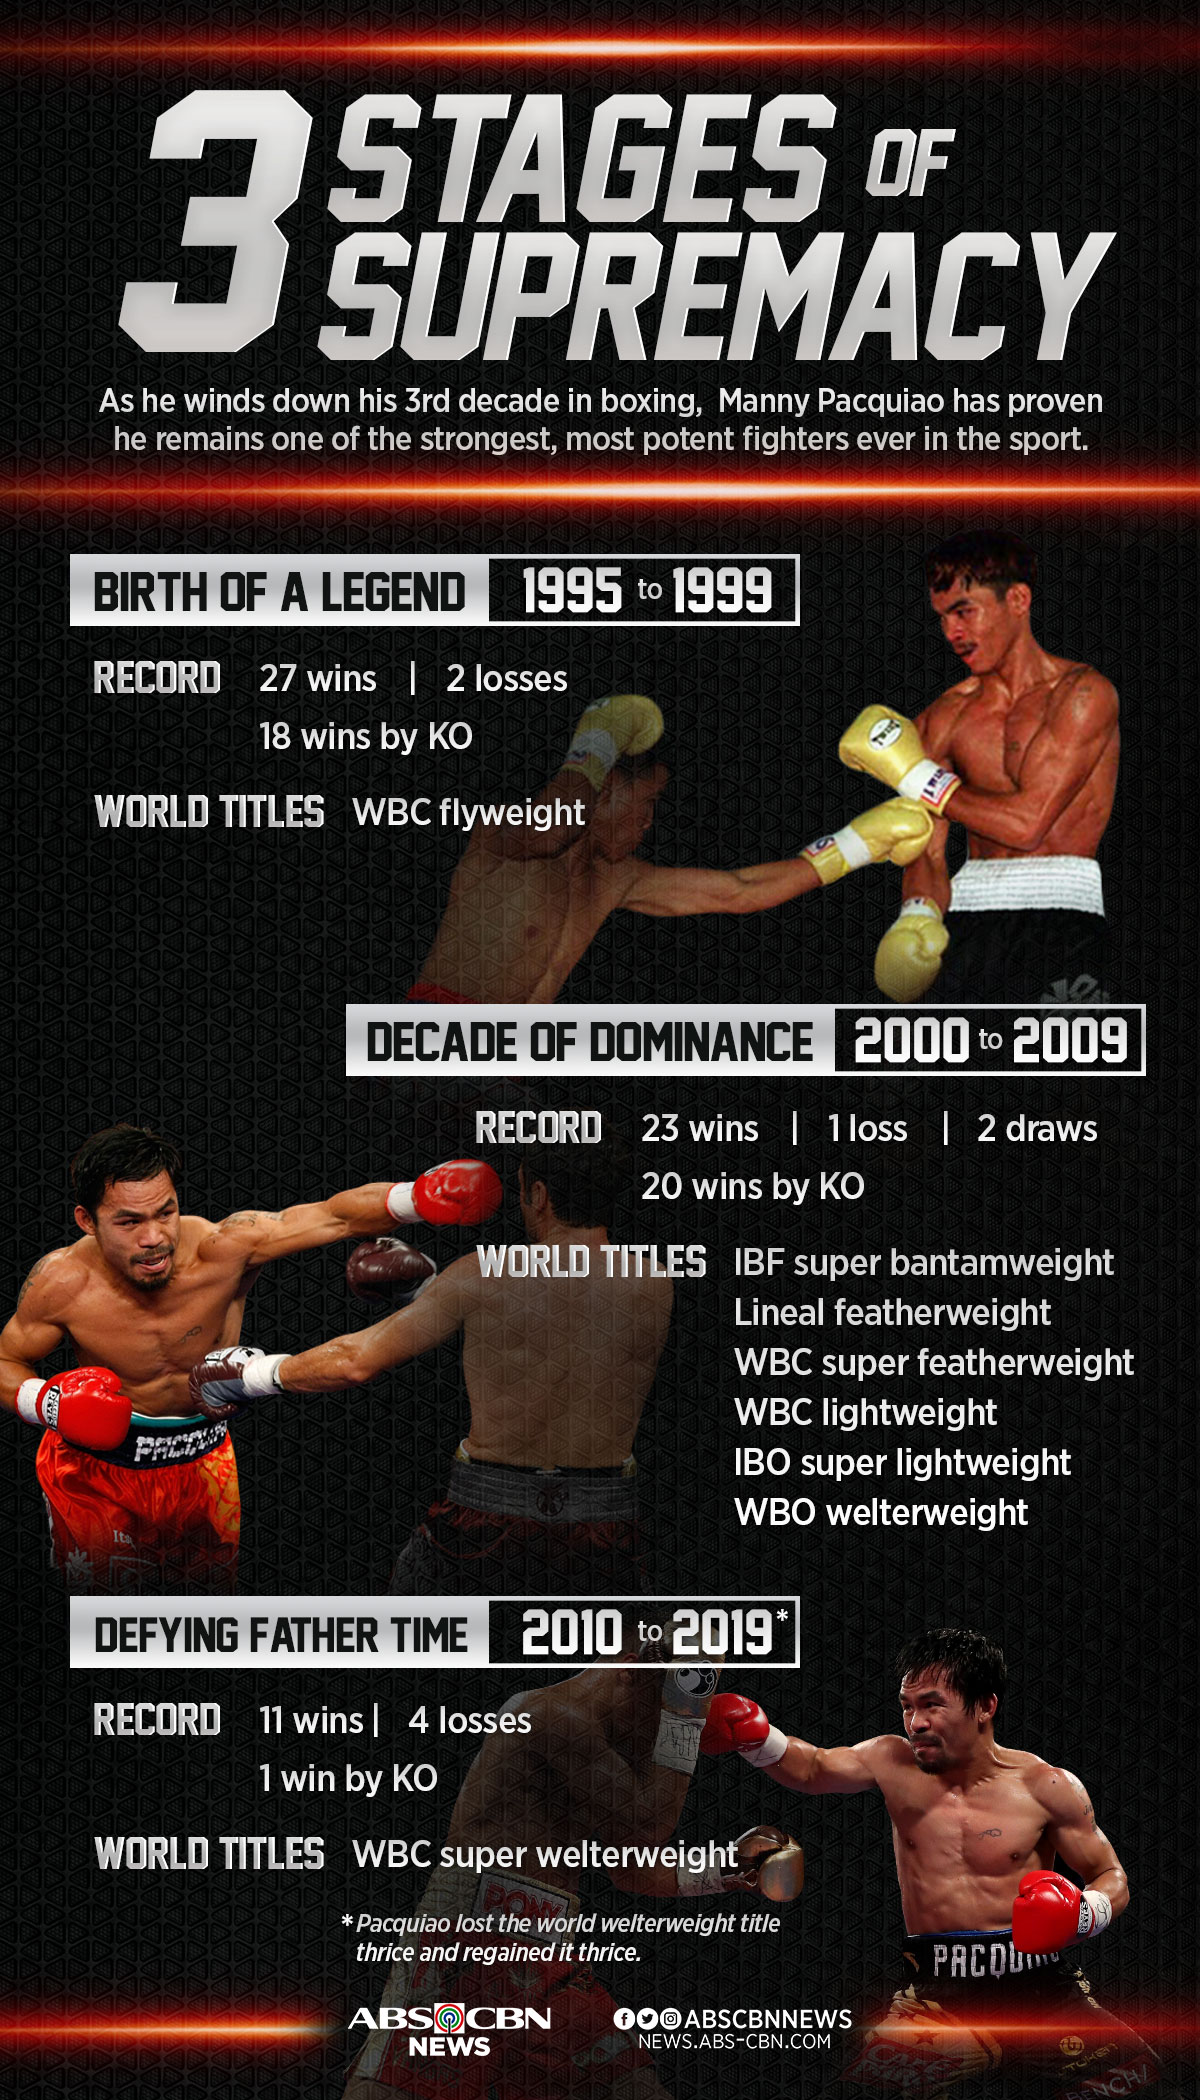 Sustained excellence: Breaking down Pacquiao’s dominance over 3 decades 1